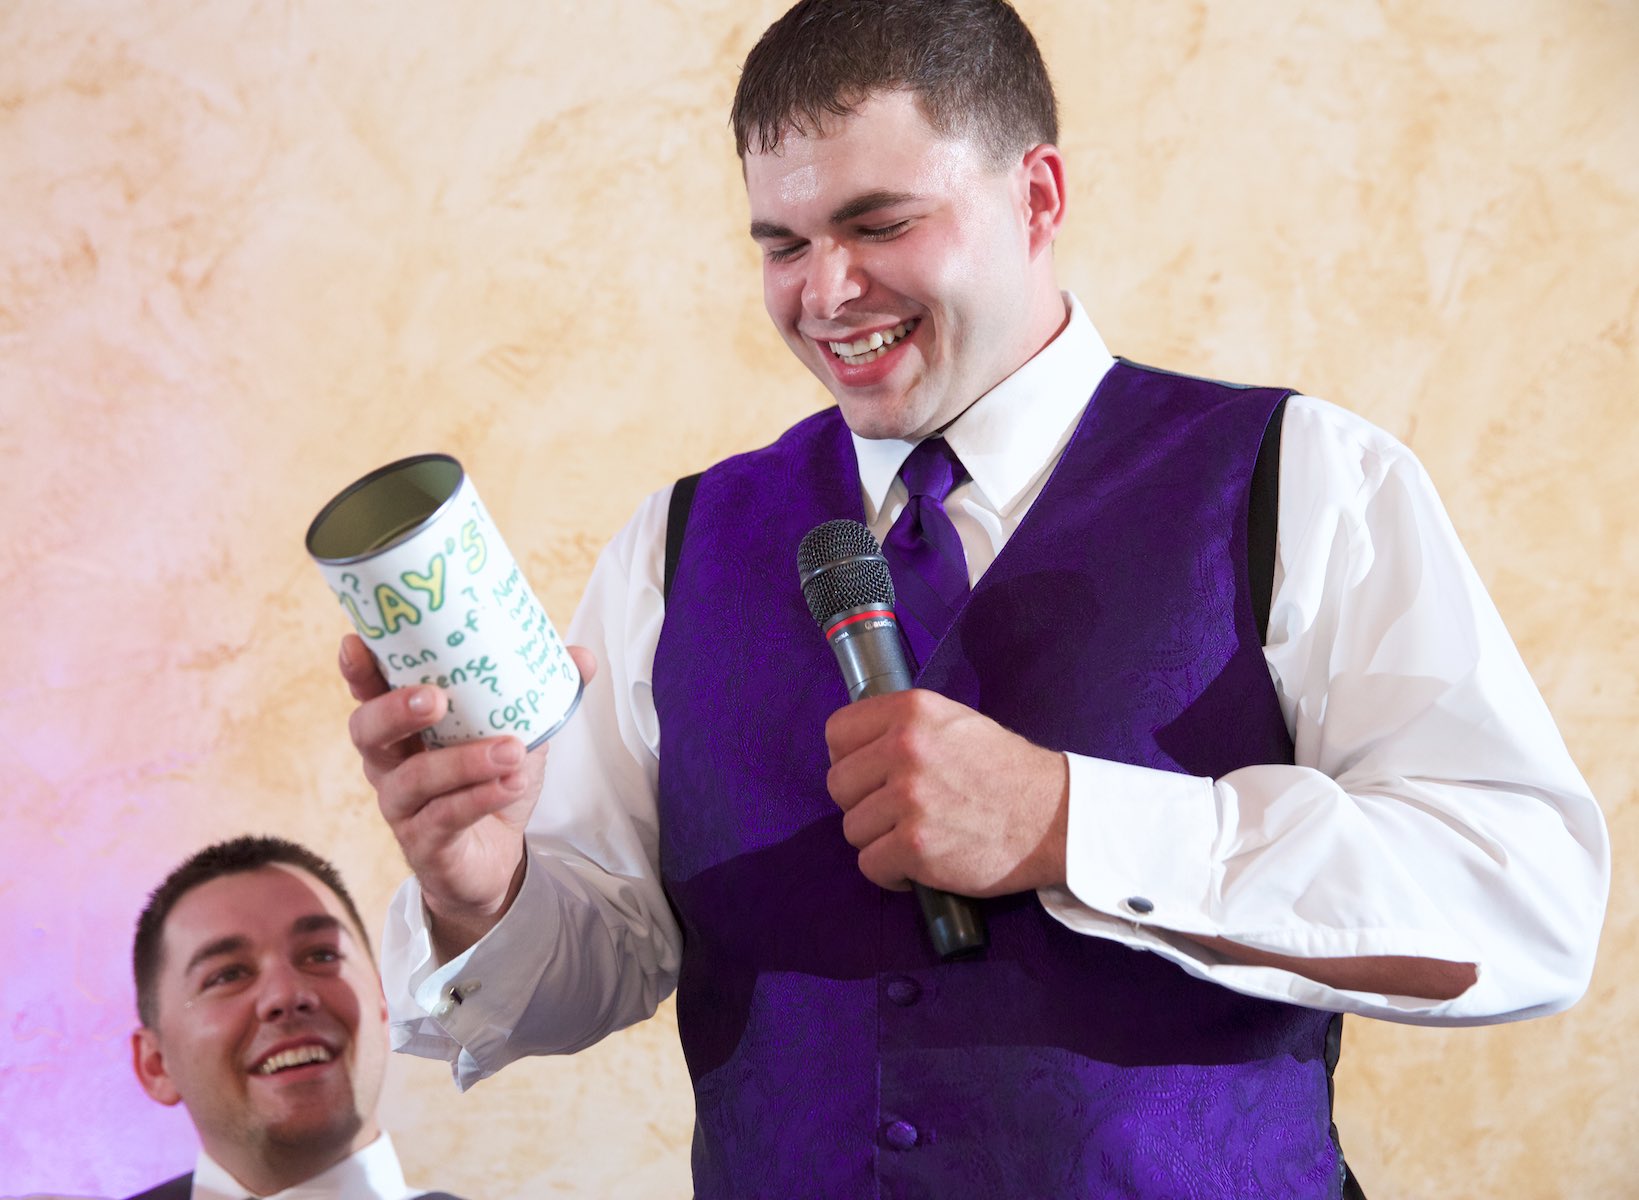 Best Man Clay brings out a {quote}can of common sense{quote} Nick gave to him back in high school during toasts, wedding reception at the Jacksonville Illinois Country Club. Wedding photography by Steve & Tiffany Warmowski.